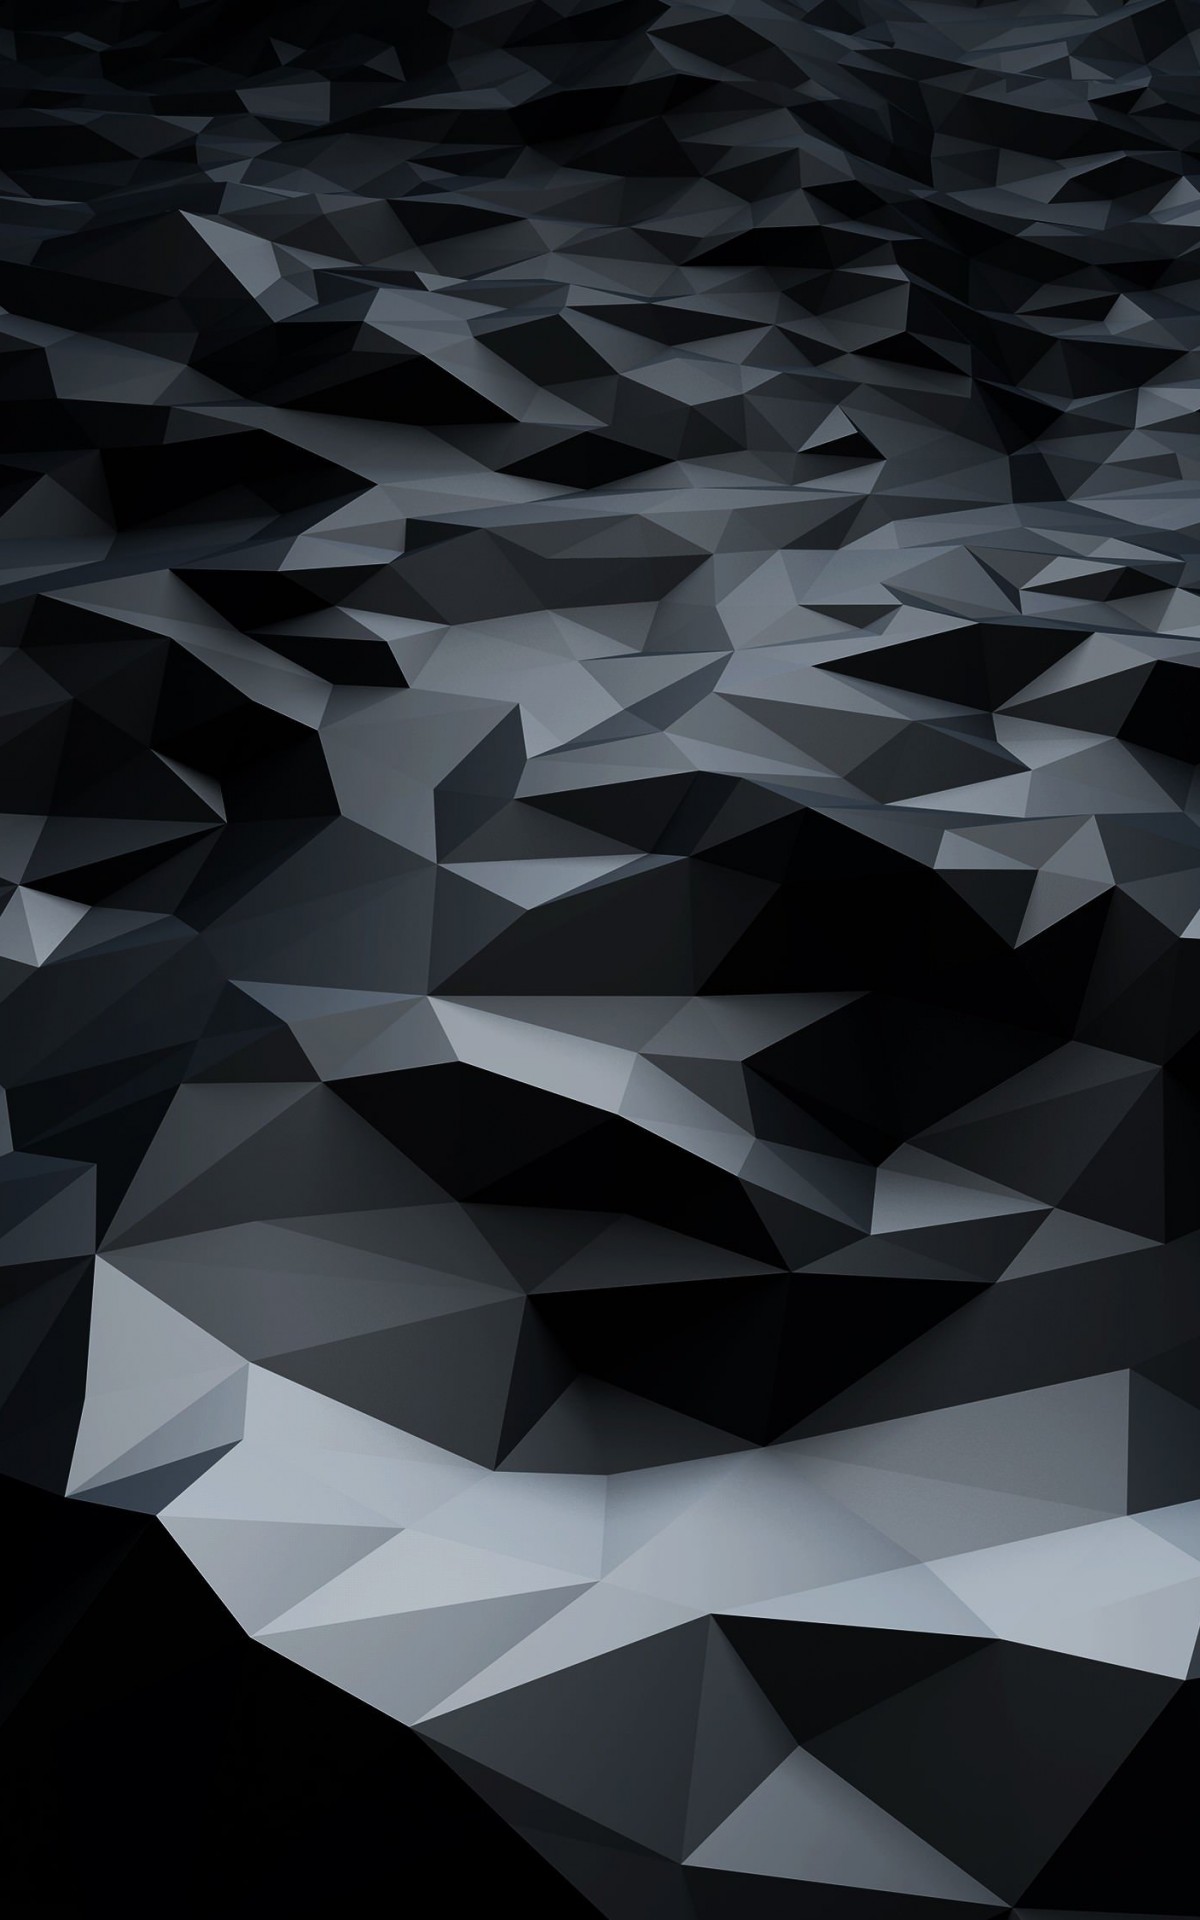 Abstract Black Low Poly Wallpaper for Amazon Kindle Fire HDX